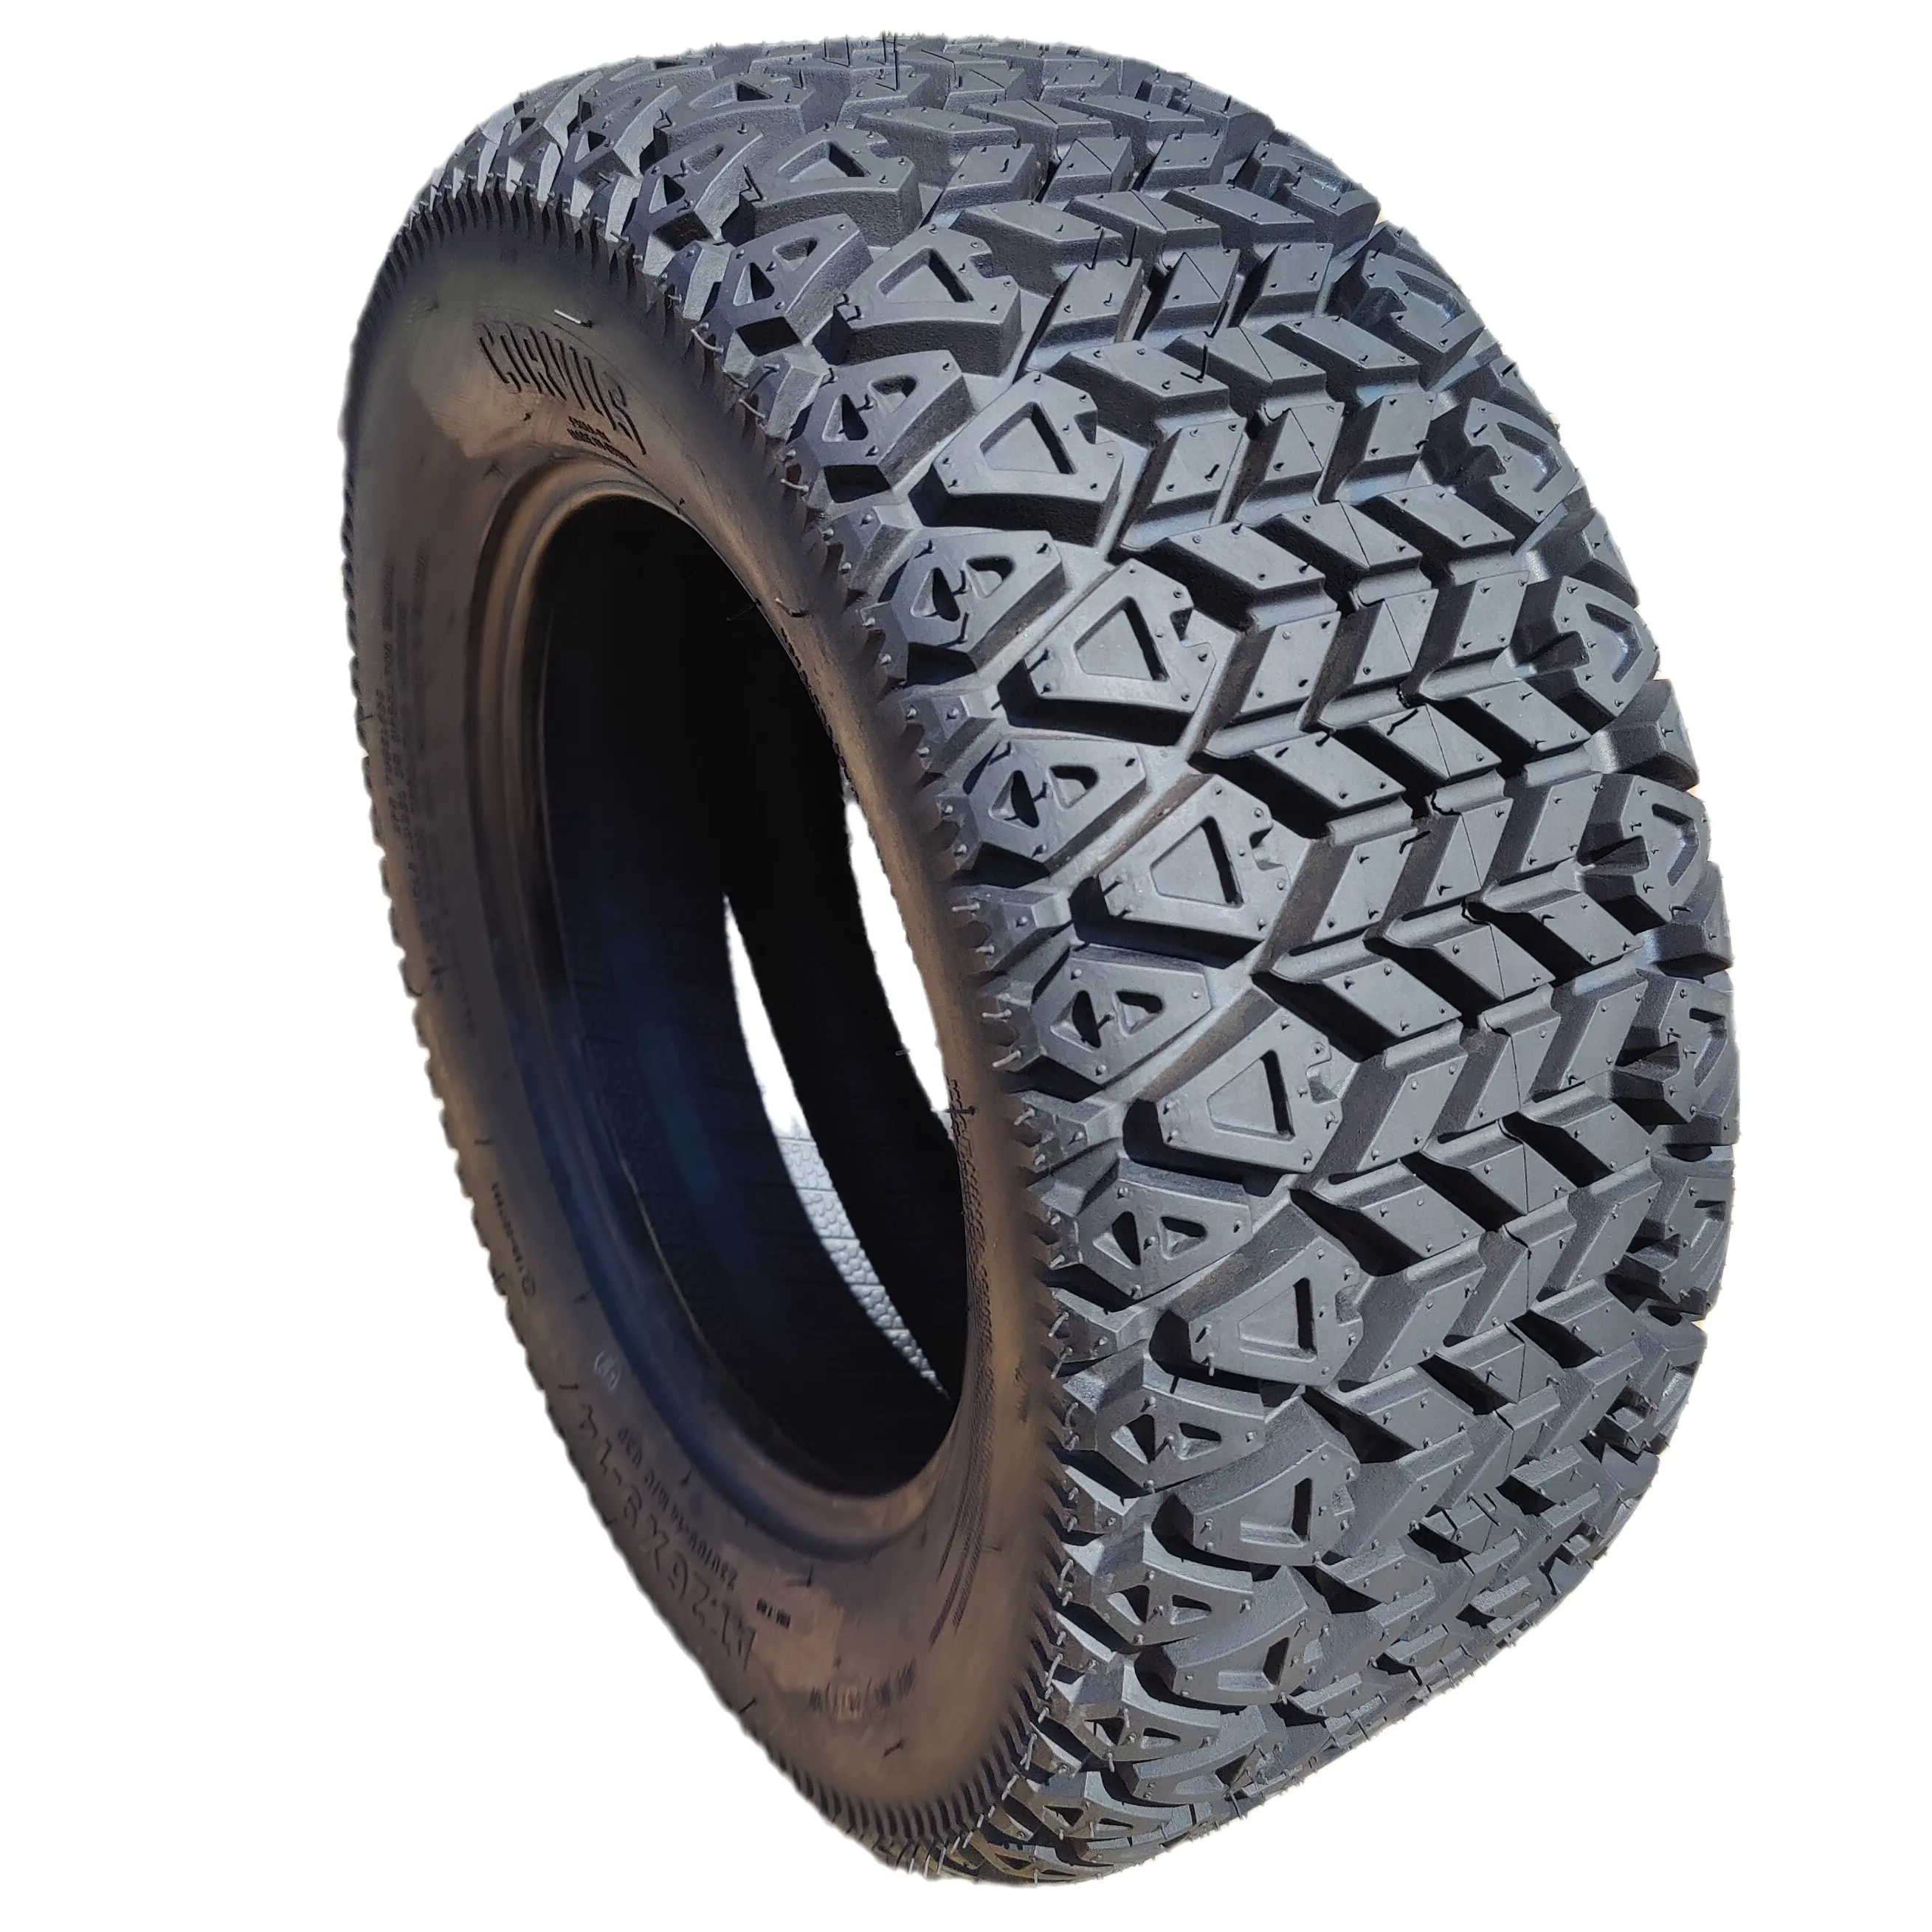 Cheap Price Atvs 26x9-14 Vacuum Tyre For Atv 14 Inch Off Road Tire For All Terrain Vehicle Most Popular Lower Price 26x9-14